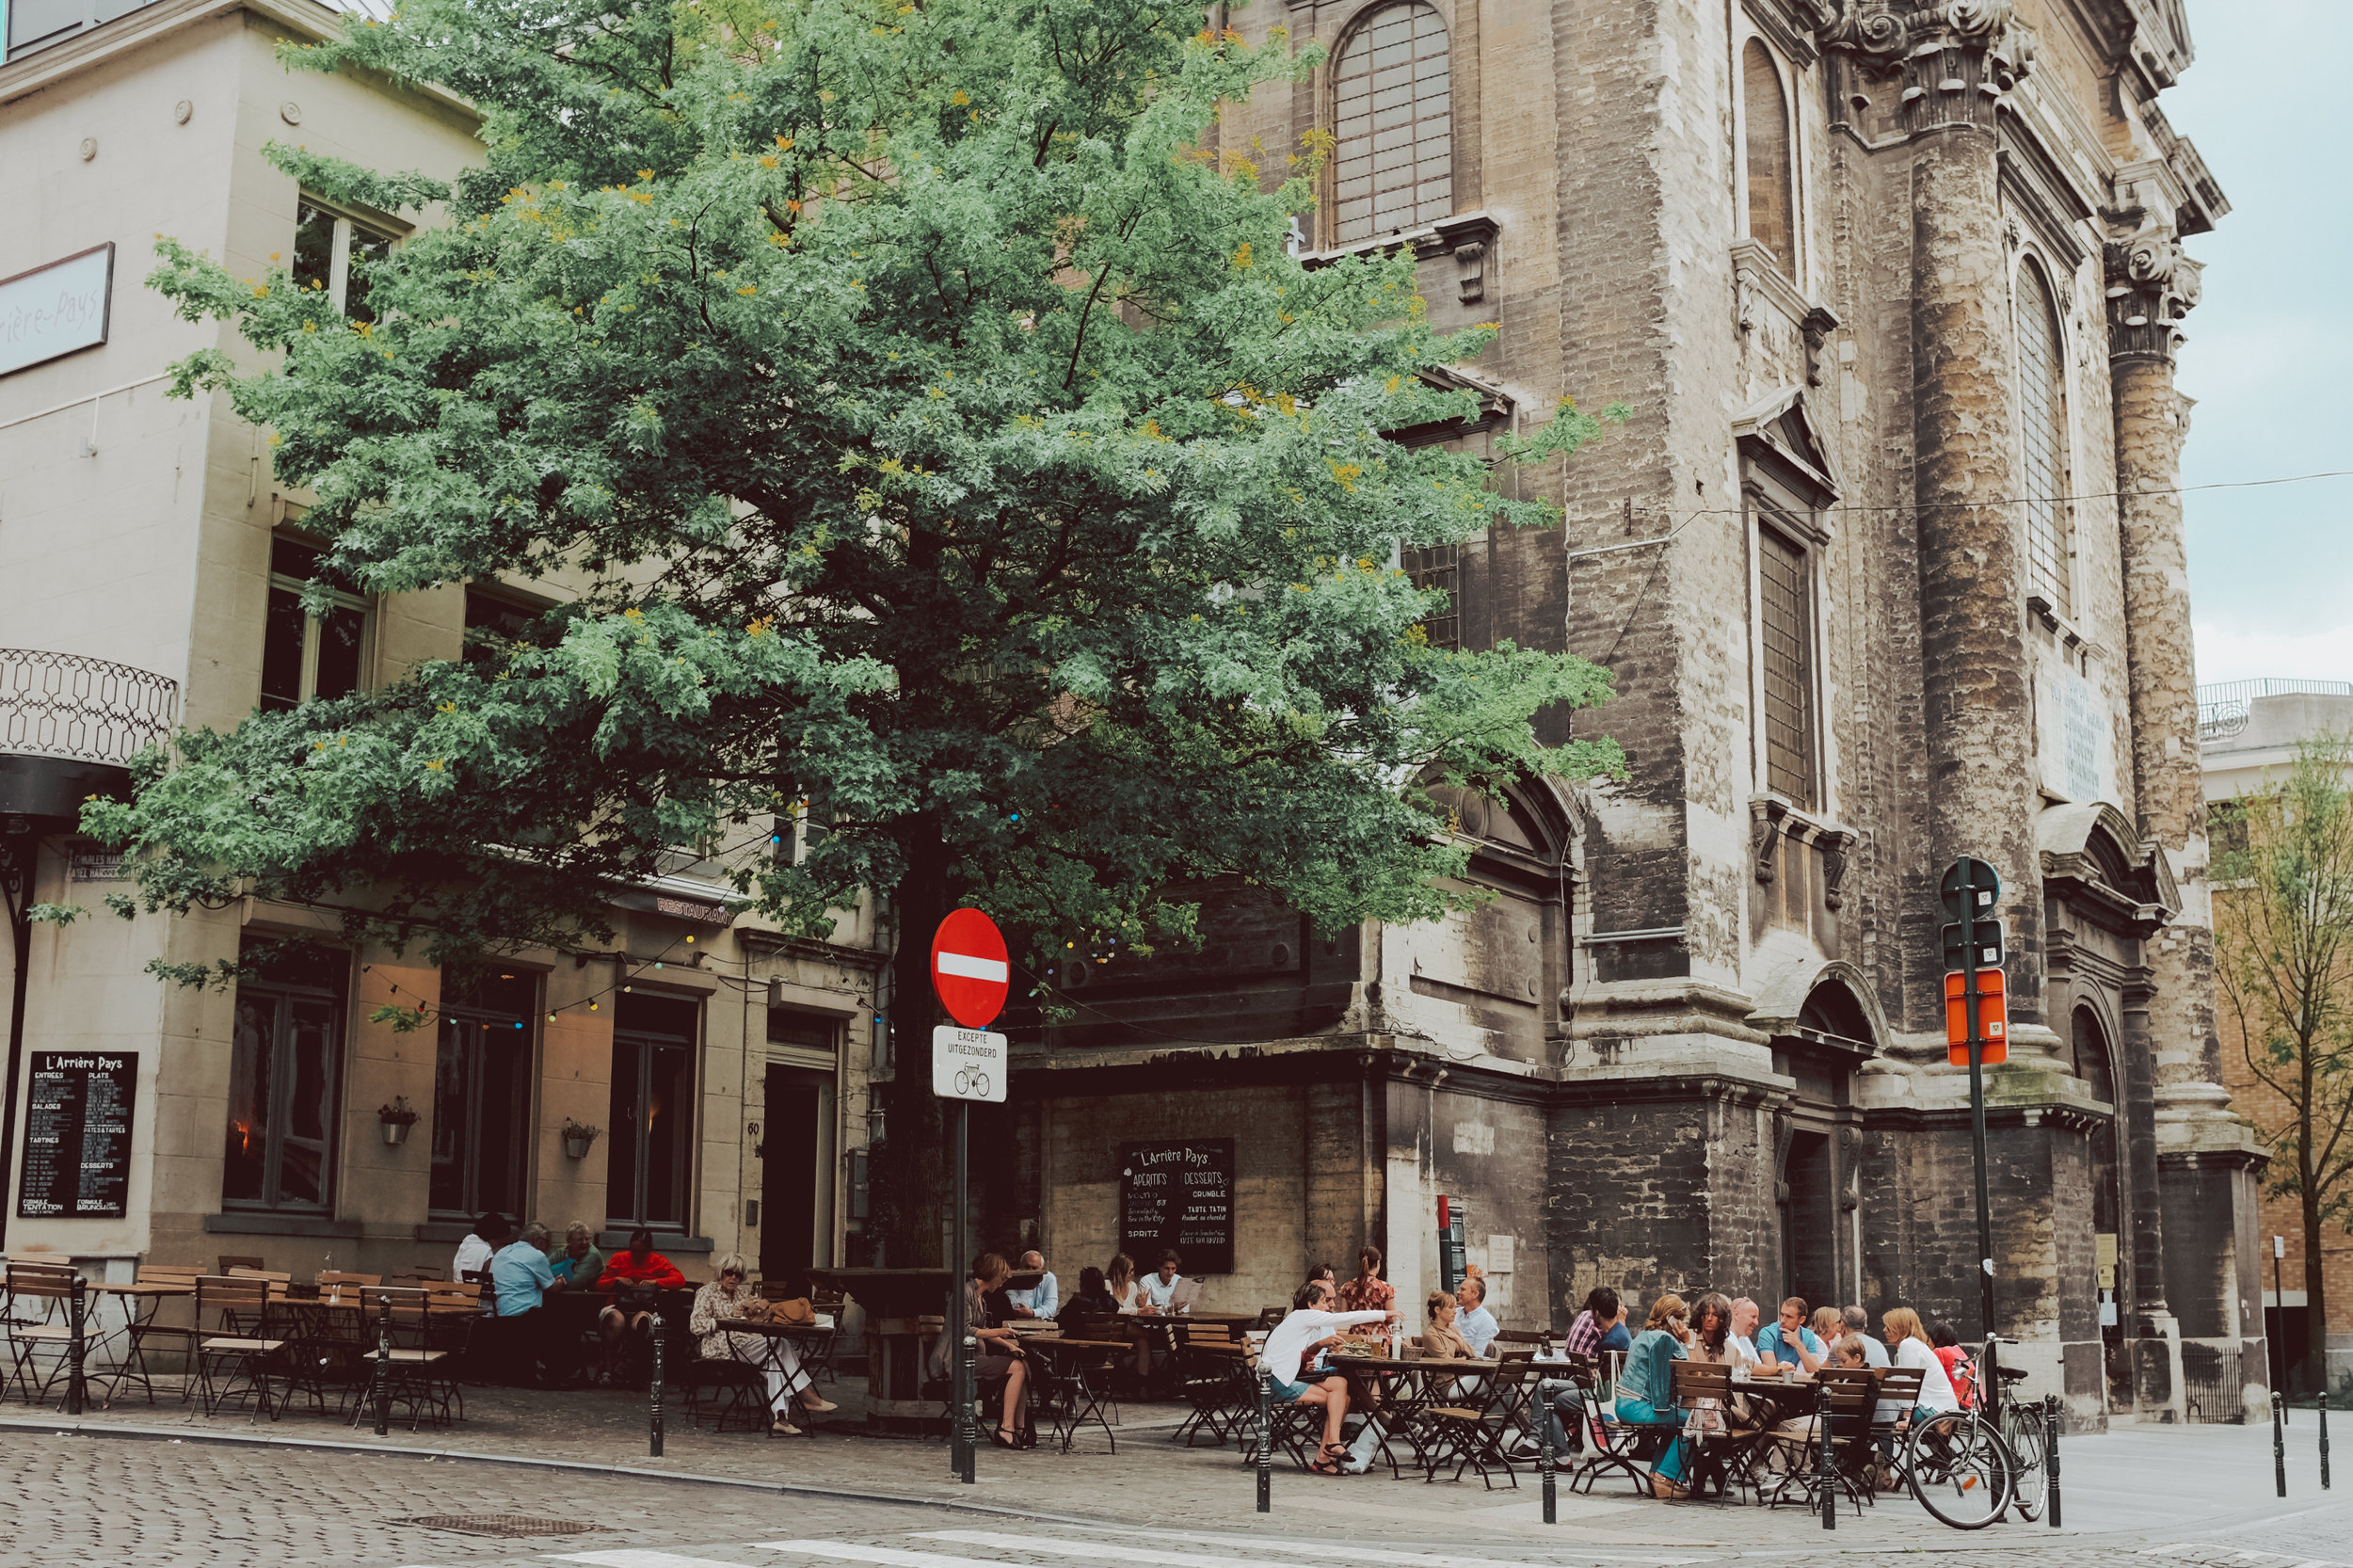 One day in Brussels Belgiun - A first timer guide to the Belgium capital  #Europe #Eurotrip